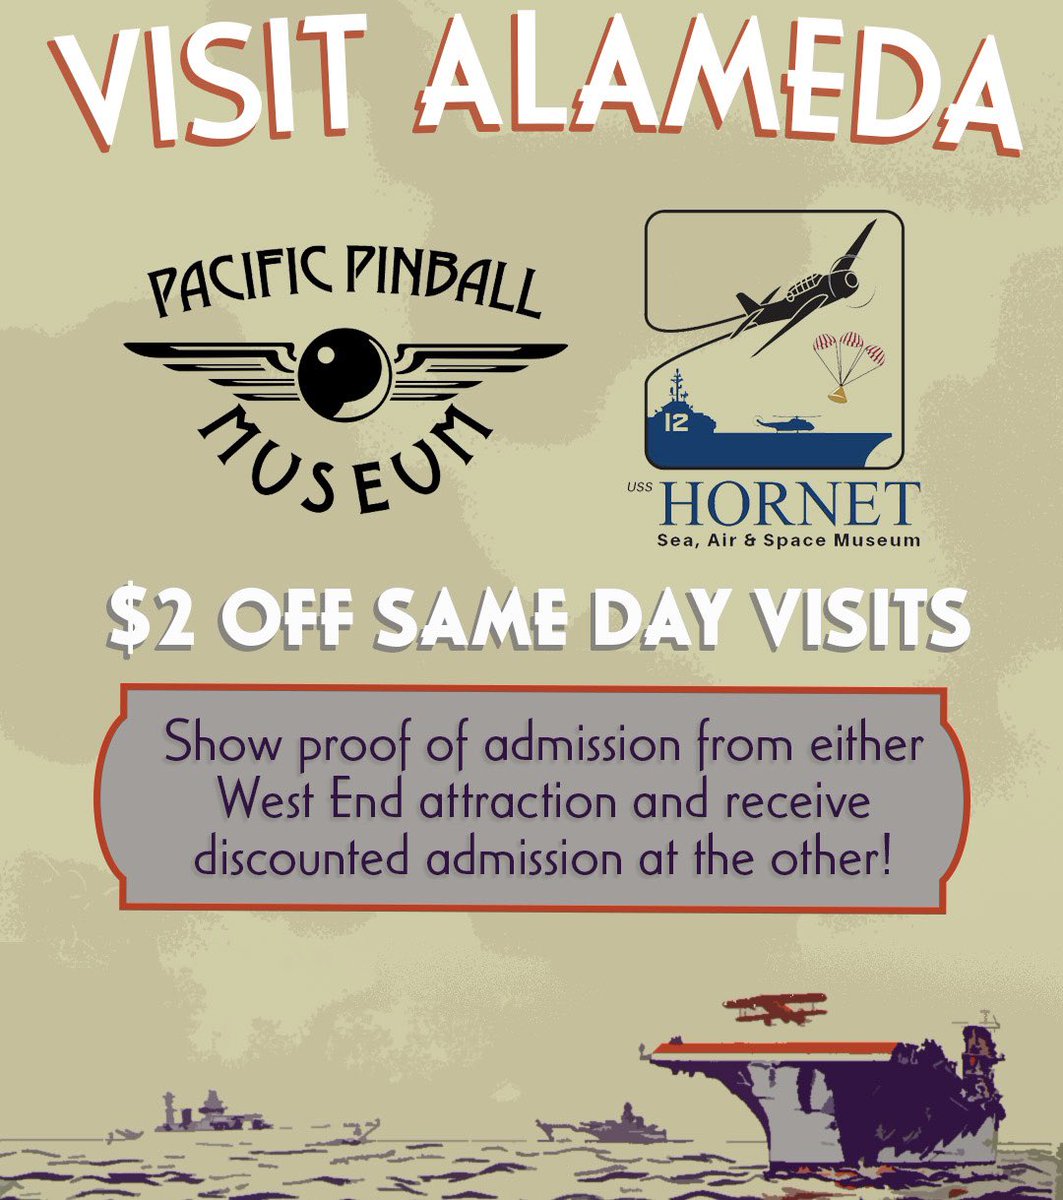 The Pacific Pinball Museum is pleased to announce a special partnership with our neighbors on the West End of Alameda, the @USSHornetMuseum ! Visit one of our nonprofit museums & simply show proof of entry at the other for a $2 discount on admission 🙌🏻 See you soon!! 🥰⚓️⚪️